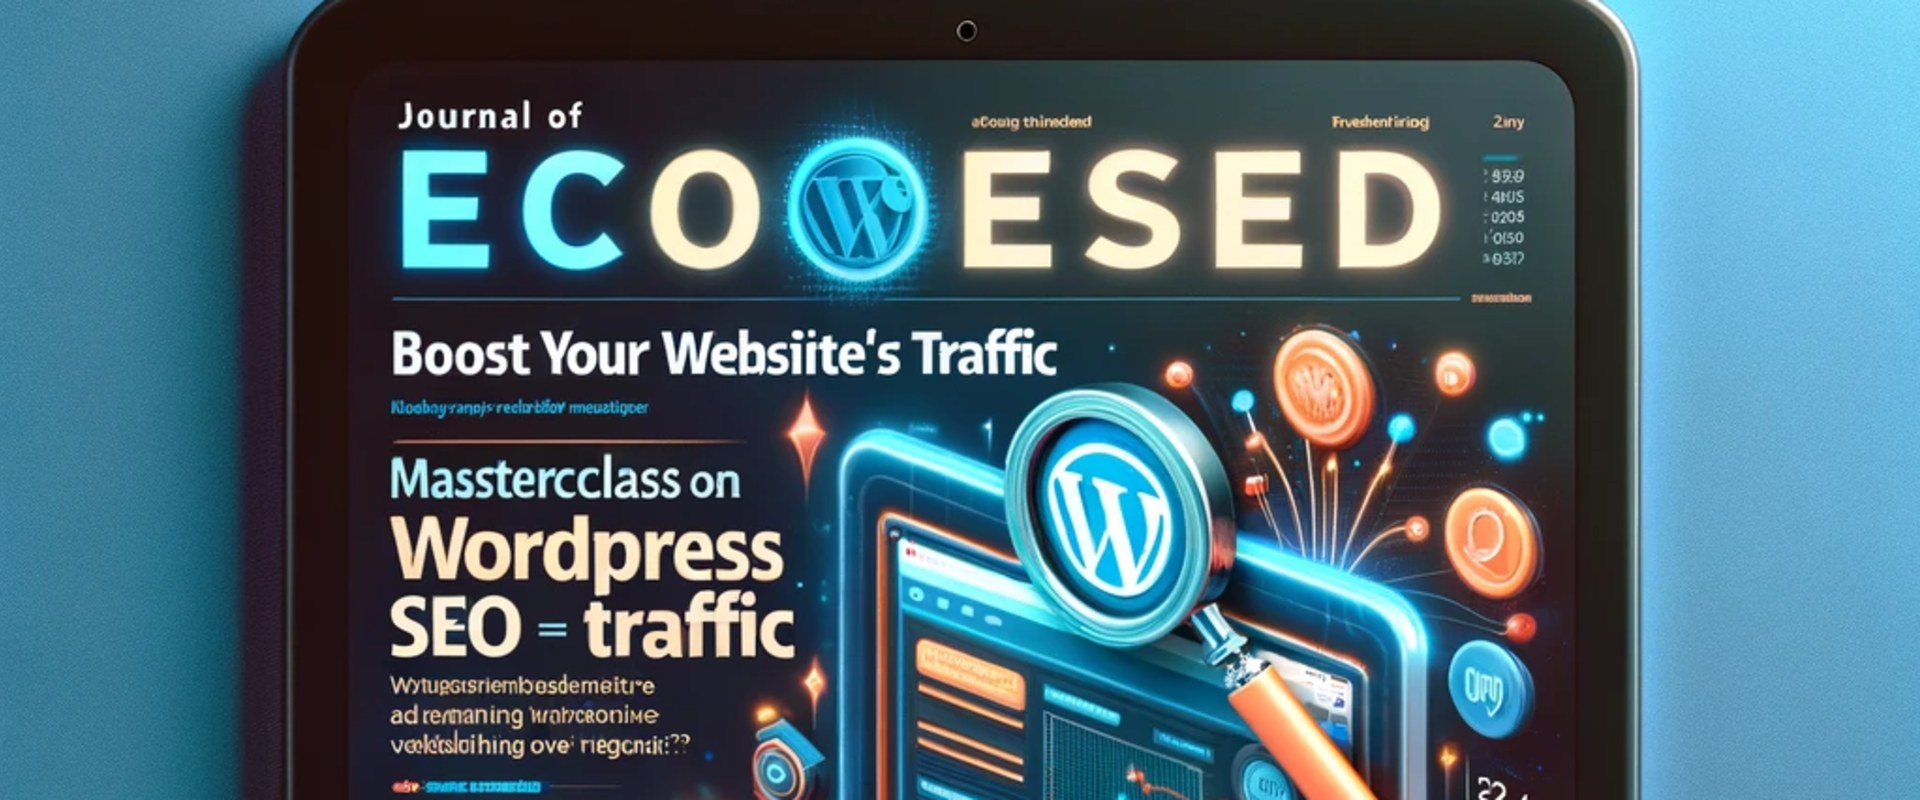 Boost Your Website's Traffic: Journal of EconEd's Masterclass on WordPress SEO